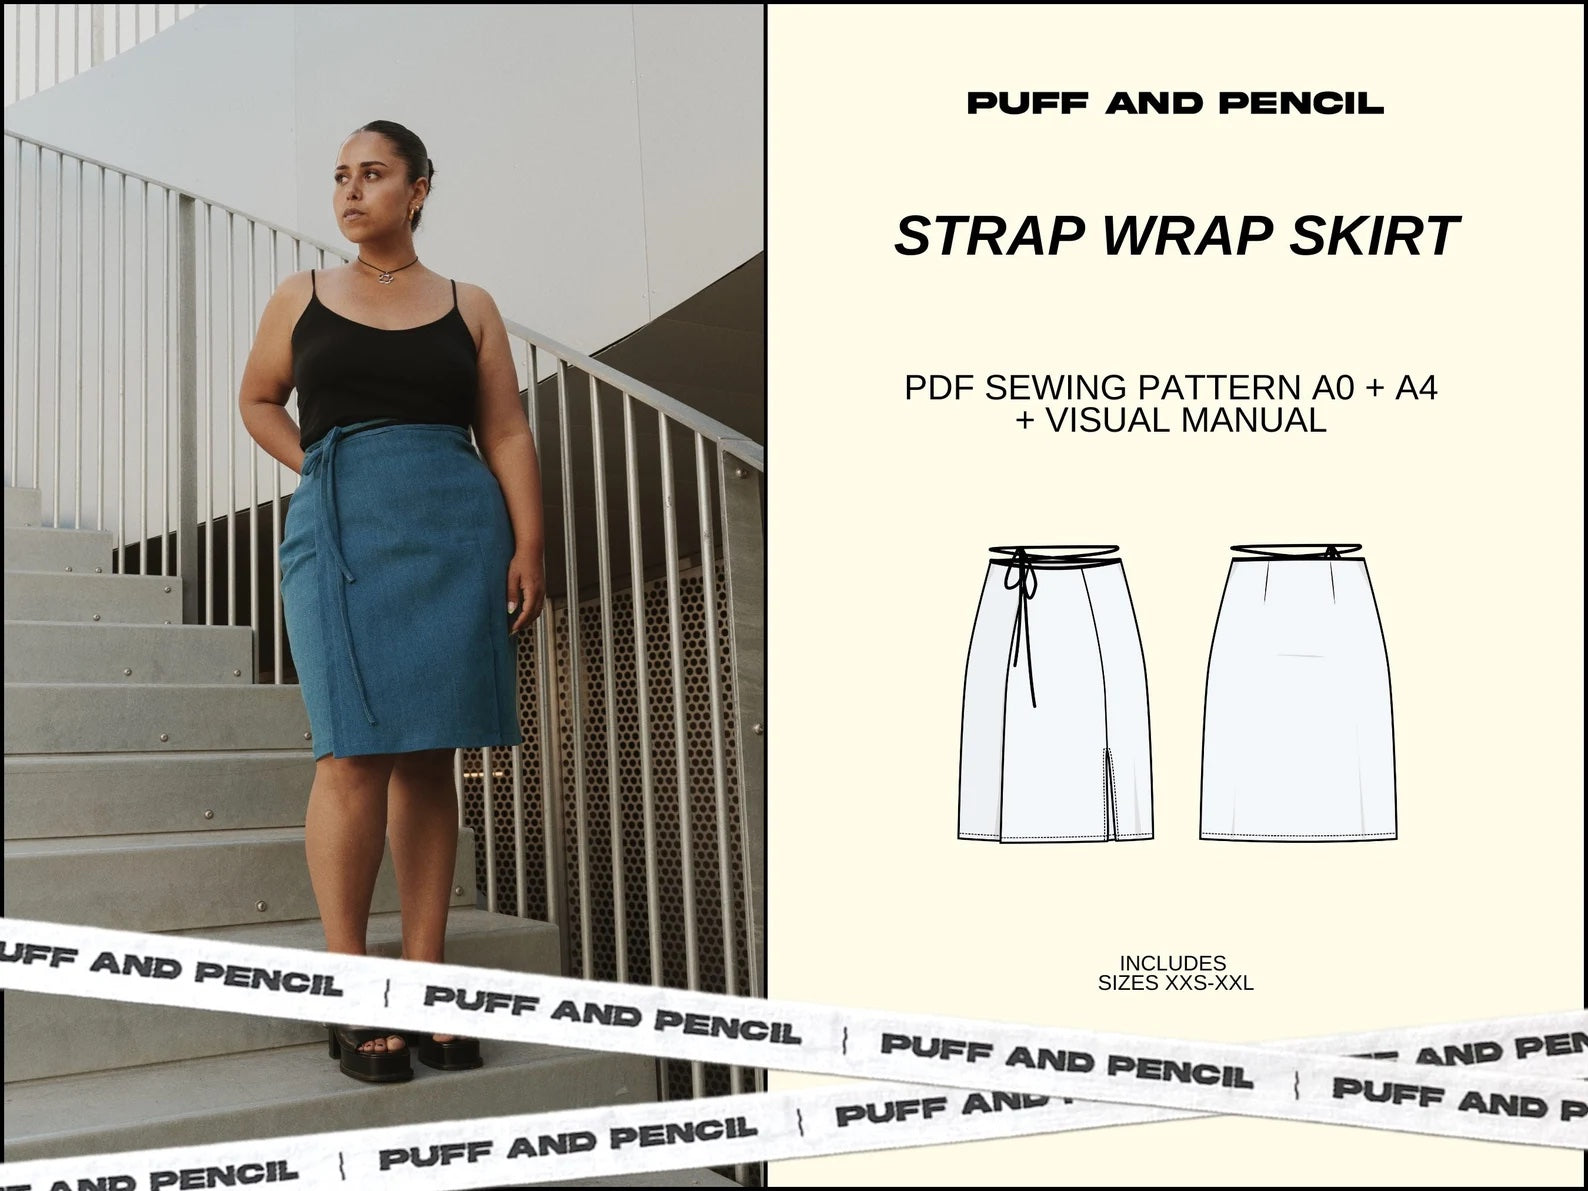 Puff and Pencil Strap Wrap Skirt